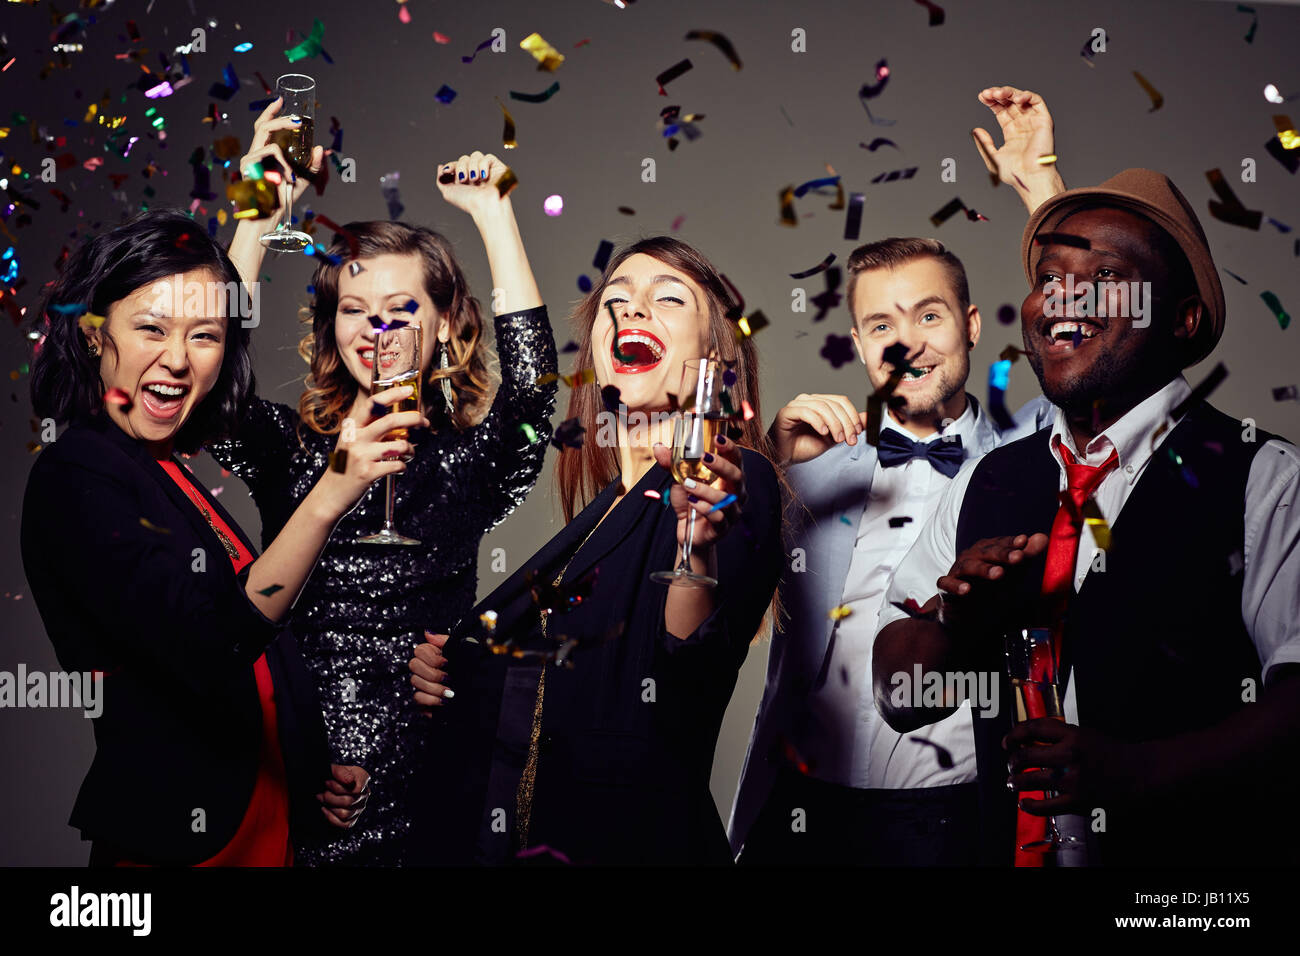 Celebrating Momentous Event with Friends Stock Photo